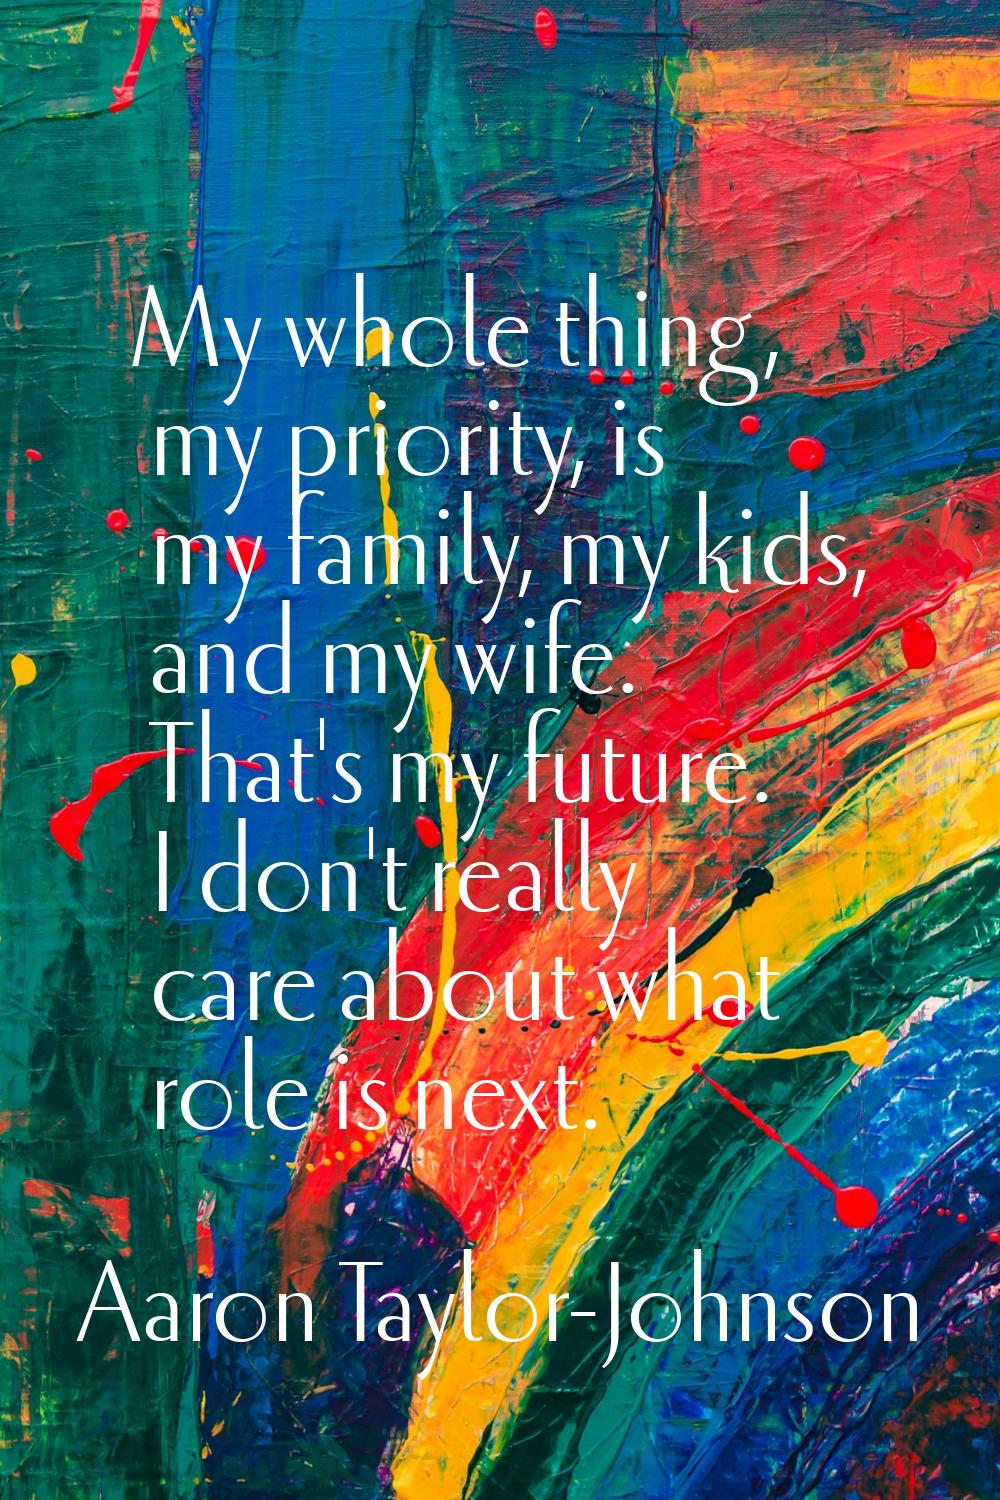 My whole thing, my priority, is my family, my kids, and my wife. That's my future. I don't really c